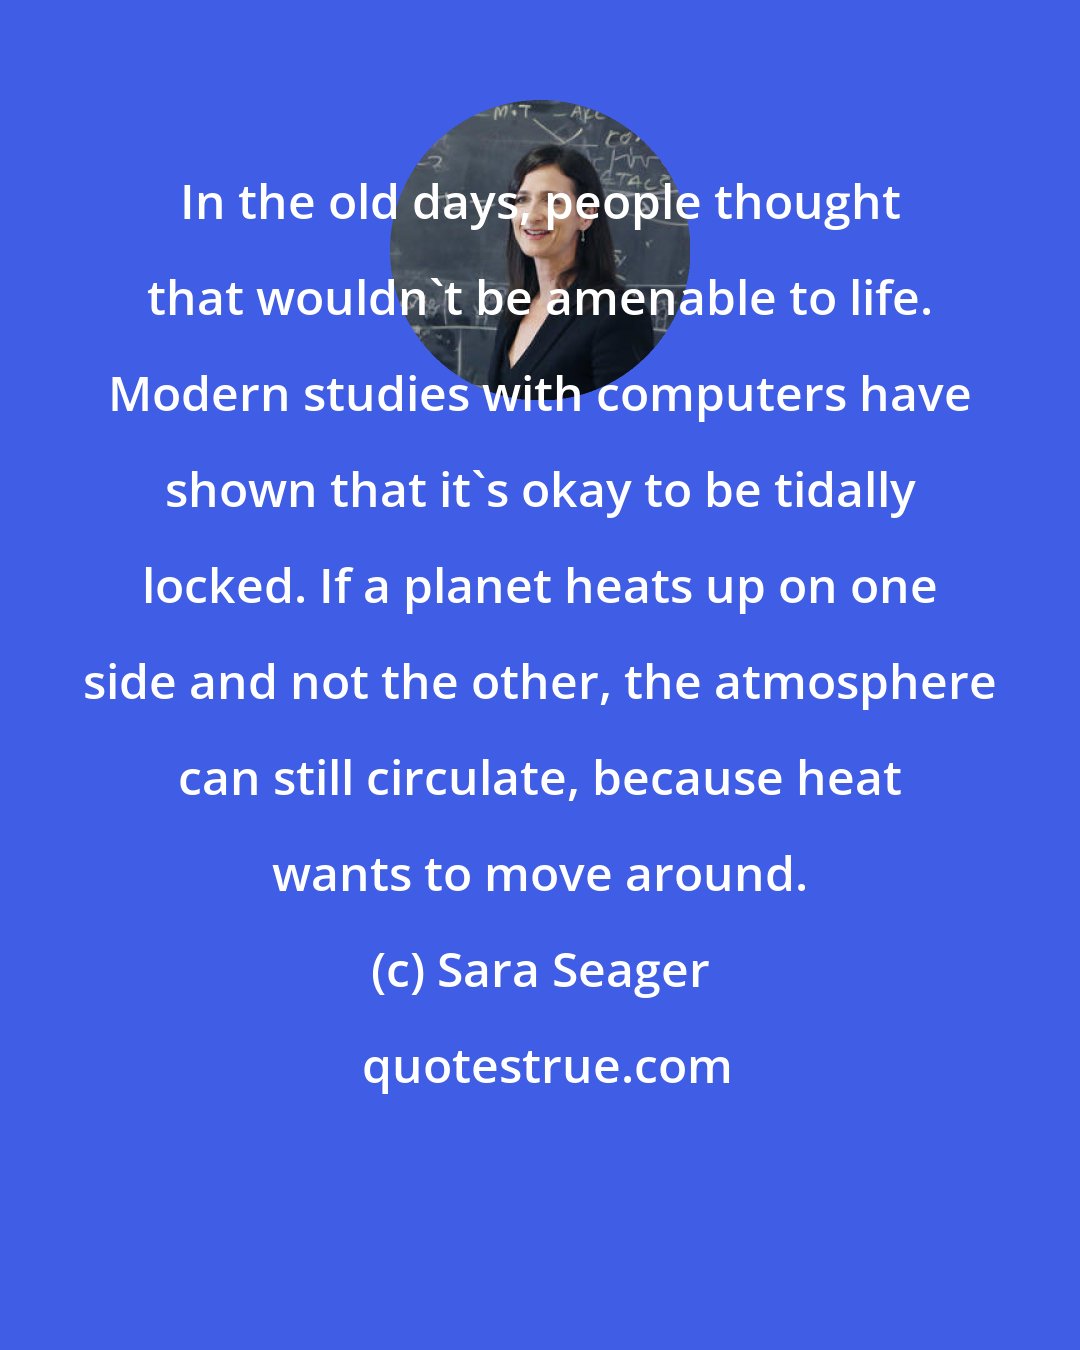 Sara Seager: In the old days, people thought that wouldn't be amenable to life. Modern studies with computers have shown that it's okay to be tidally locked. If a planet heats up on one side and not the other, the atmosphere can still circulate, because heat wants to move around.